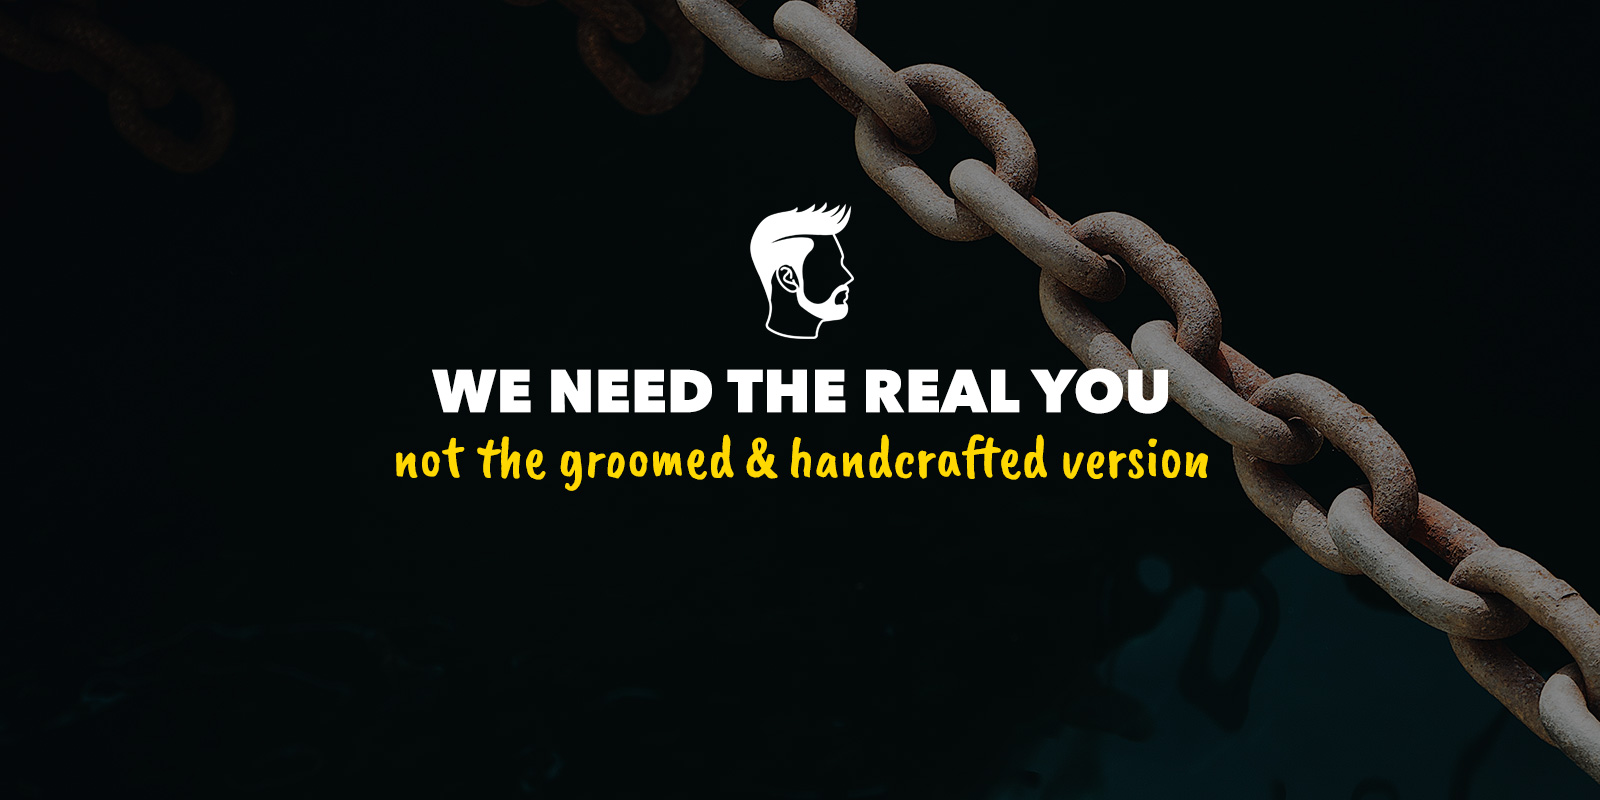 we need the real you, not the groomed and handcrafted version